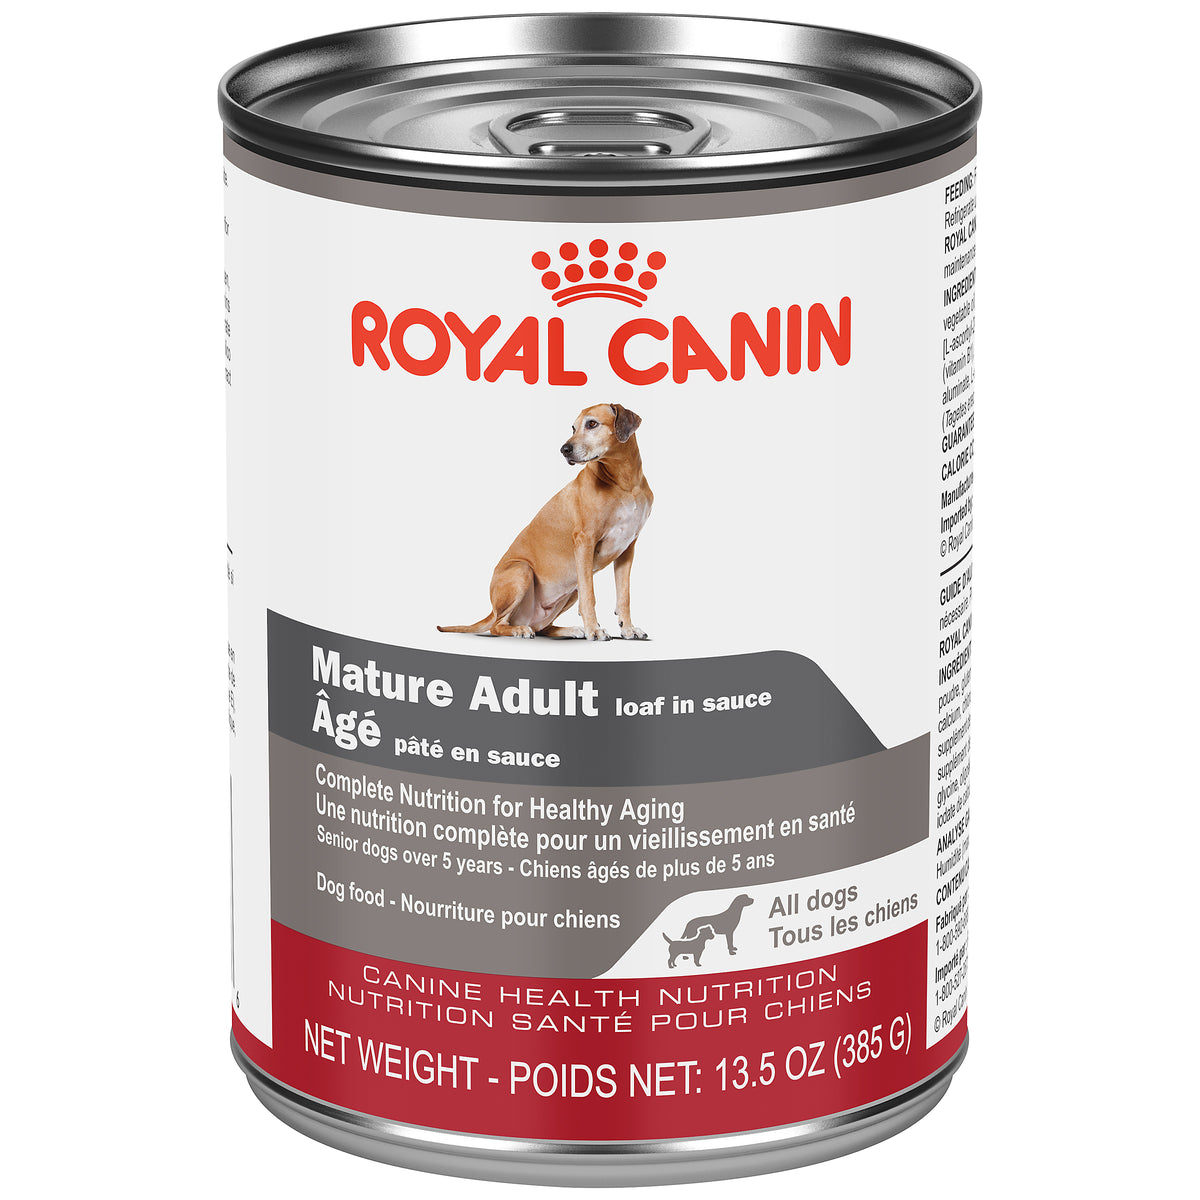 Royal Canin Mature Adult Loaf Canned Dog Food (385g)